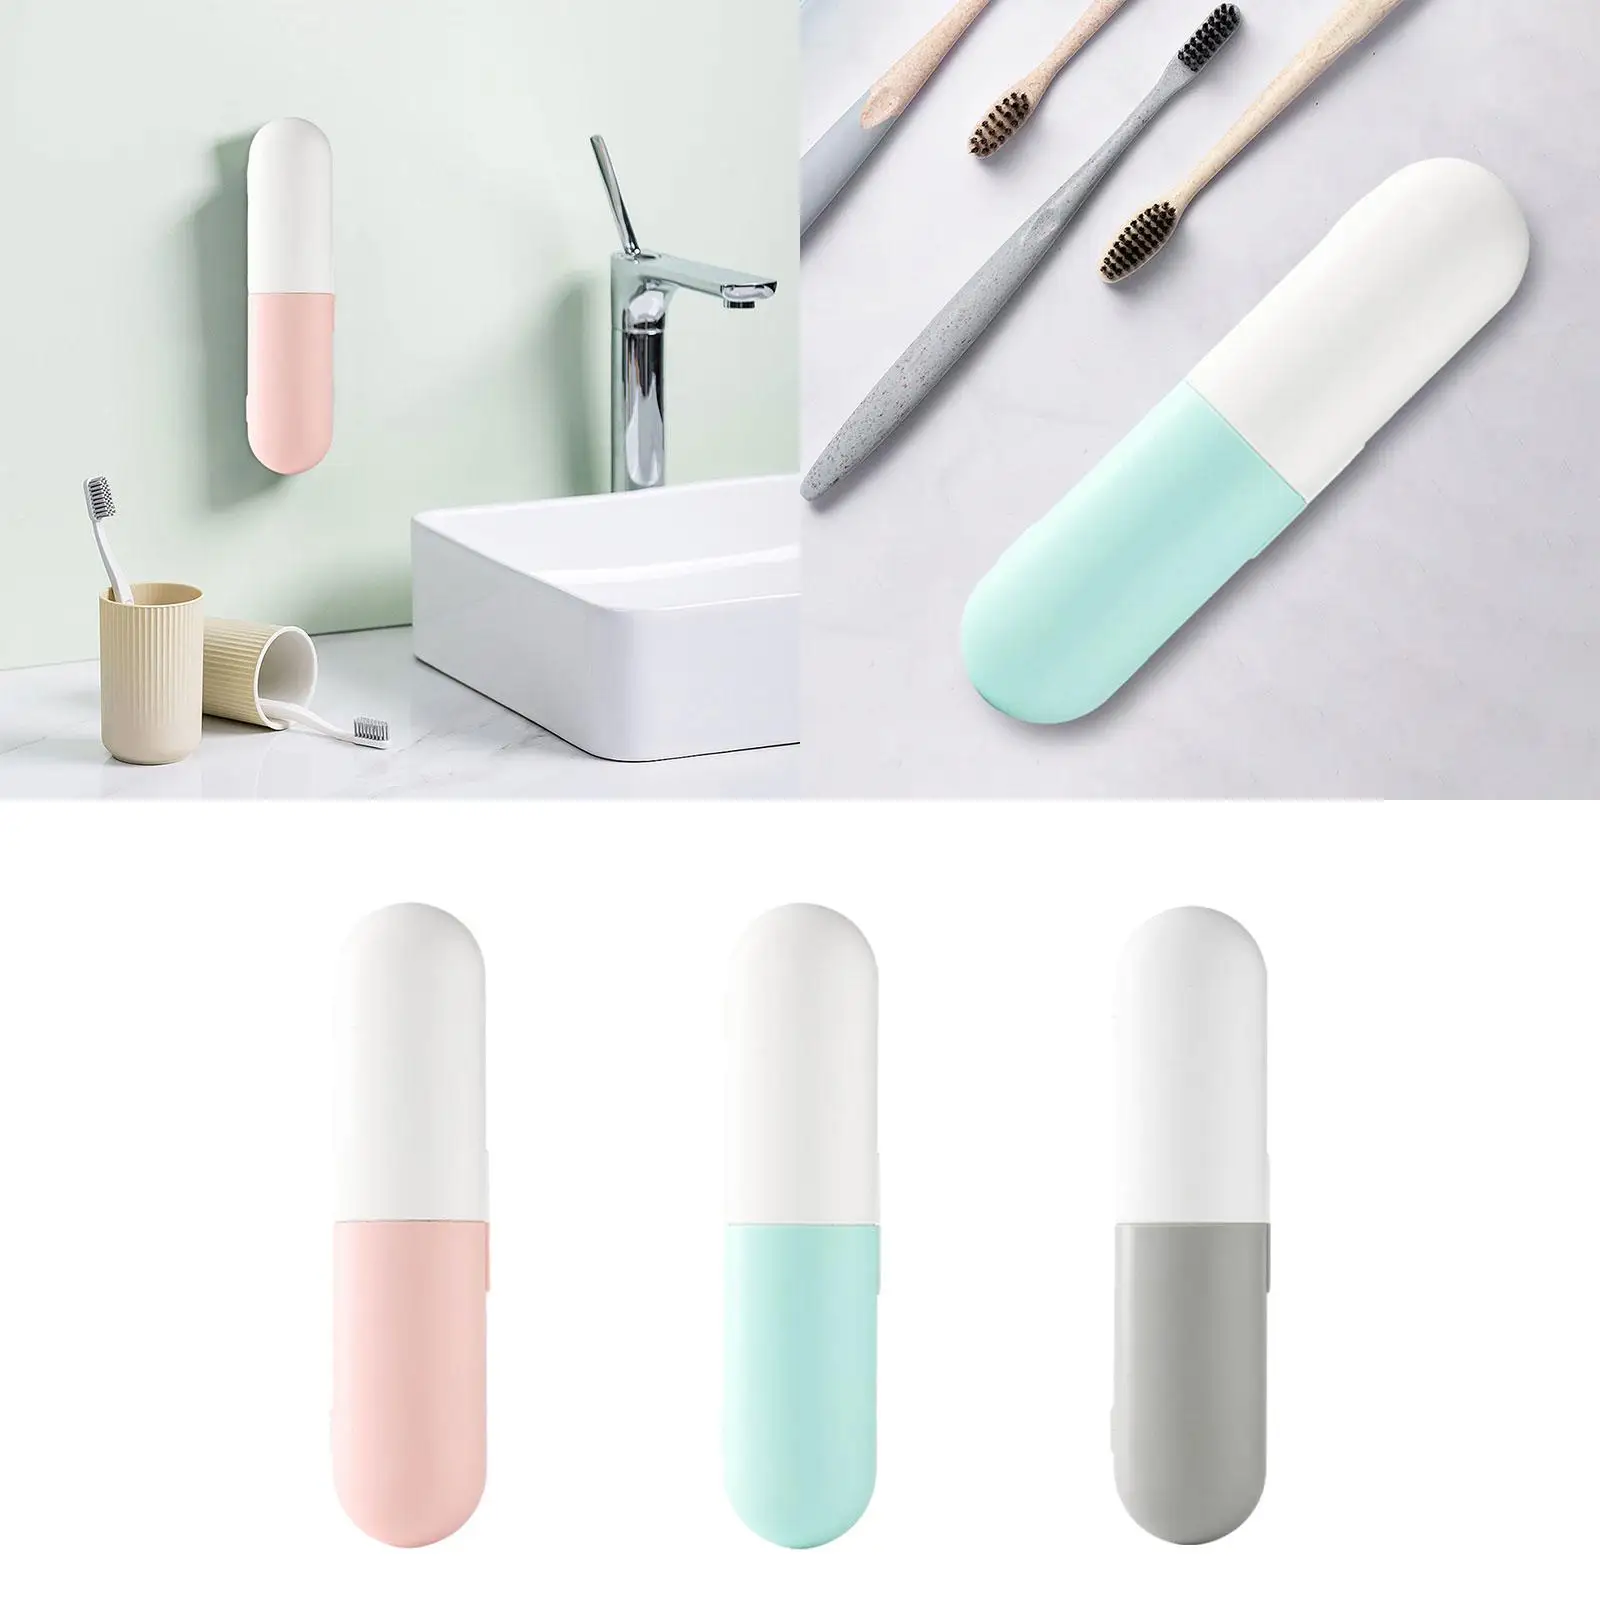 Toothbrush Sanitizer Lightweight with Cleaning Light Smart Tooth Brush Travel Case for Travel Bathroom Home Business Trip Hotel